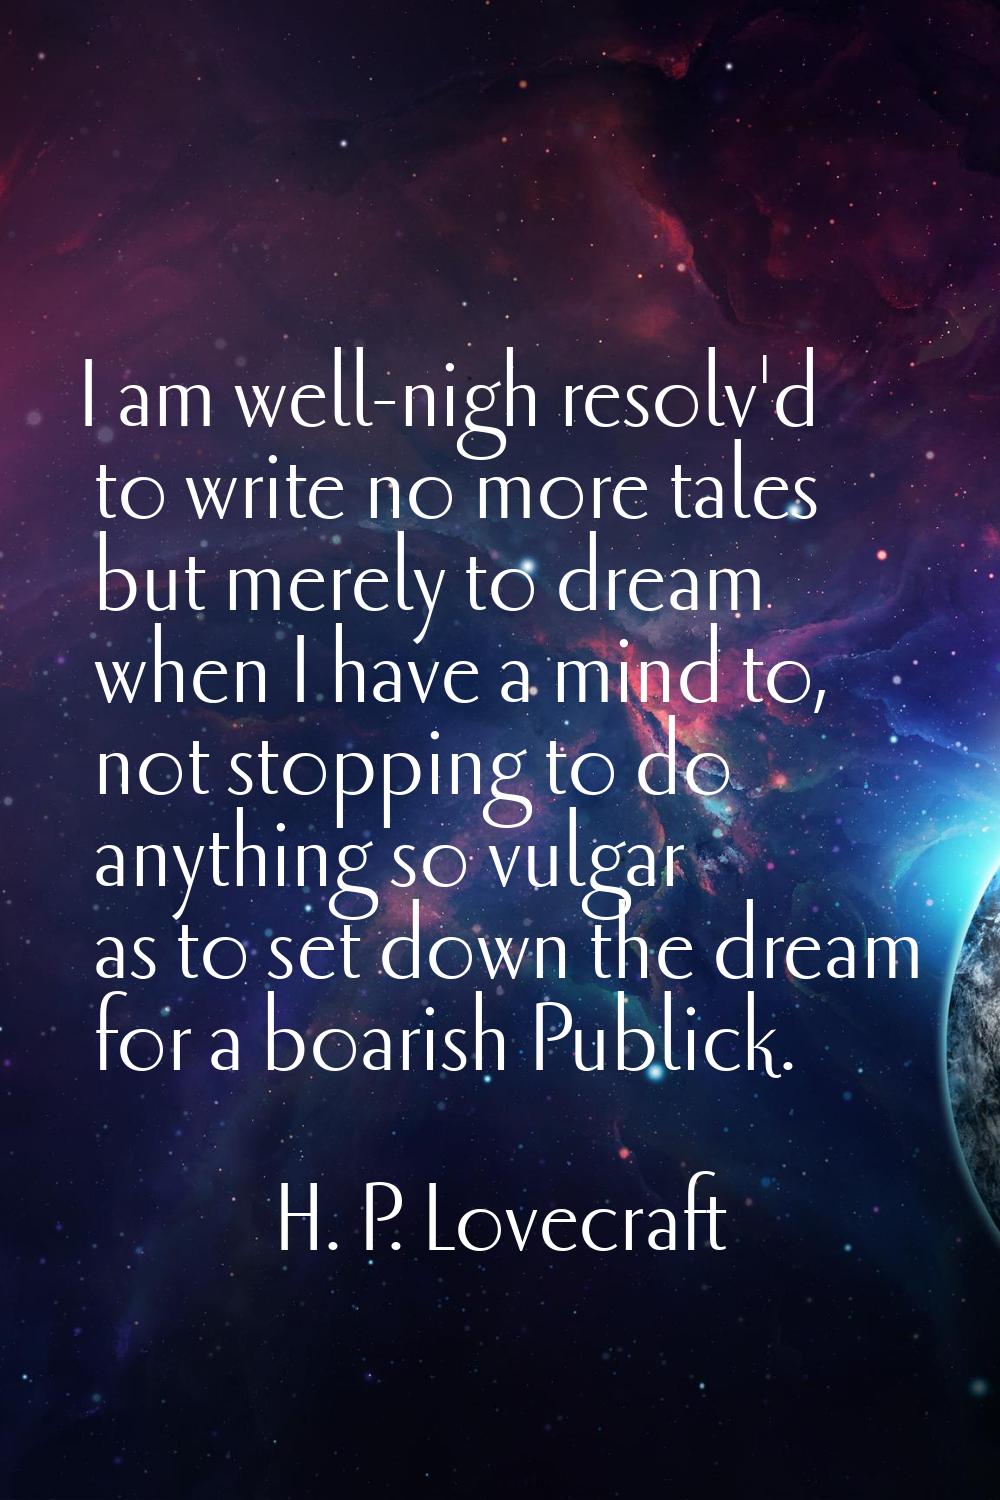 I am well-nigh resolv'd to write no more tales but merely to dream when I have a mind to, not stopp